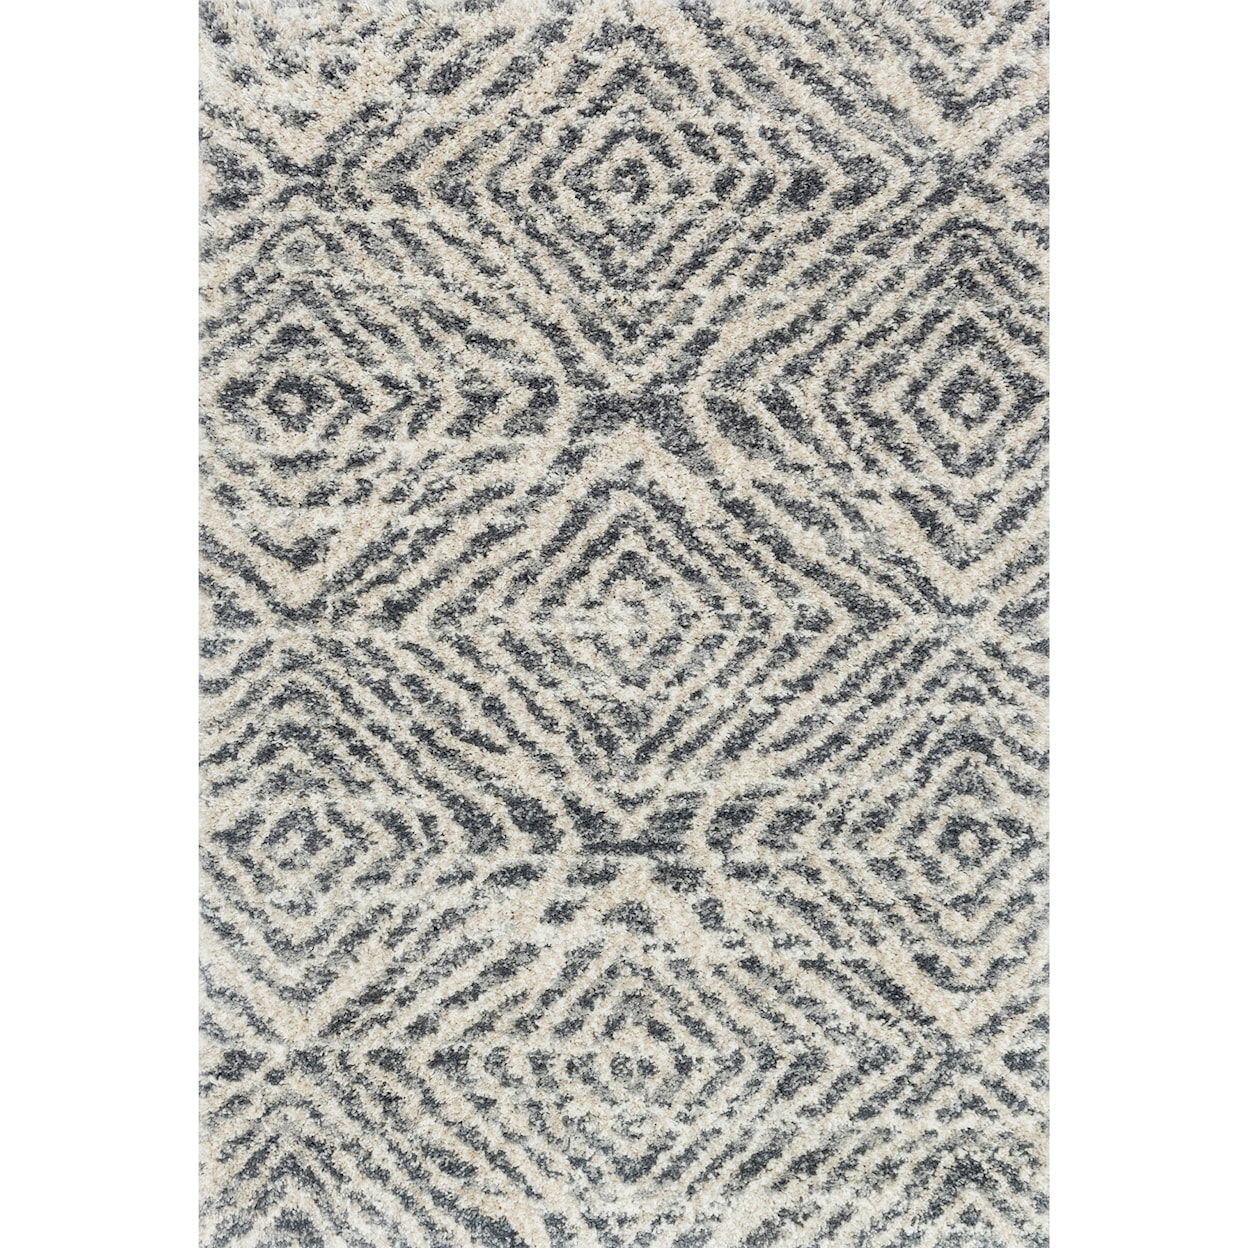 Loloi Rugs Quincy 5'3" x 7'6" Graphite / Sand Rug